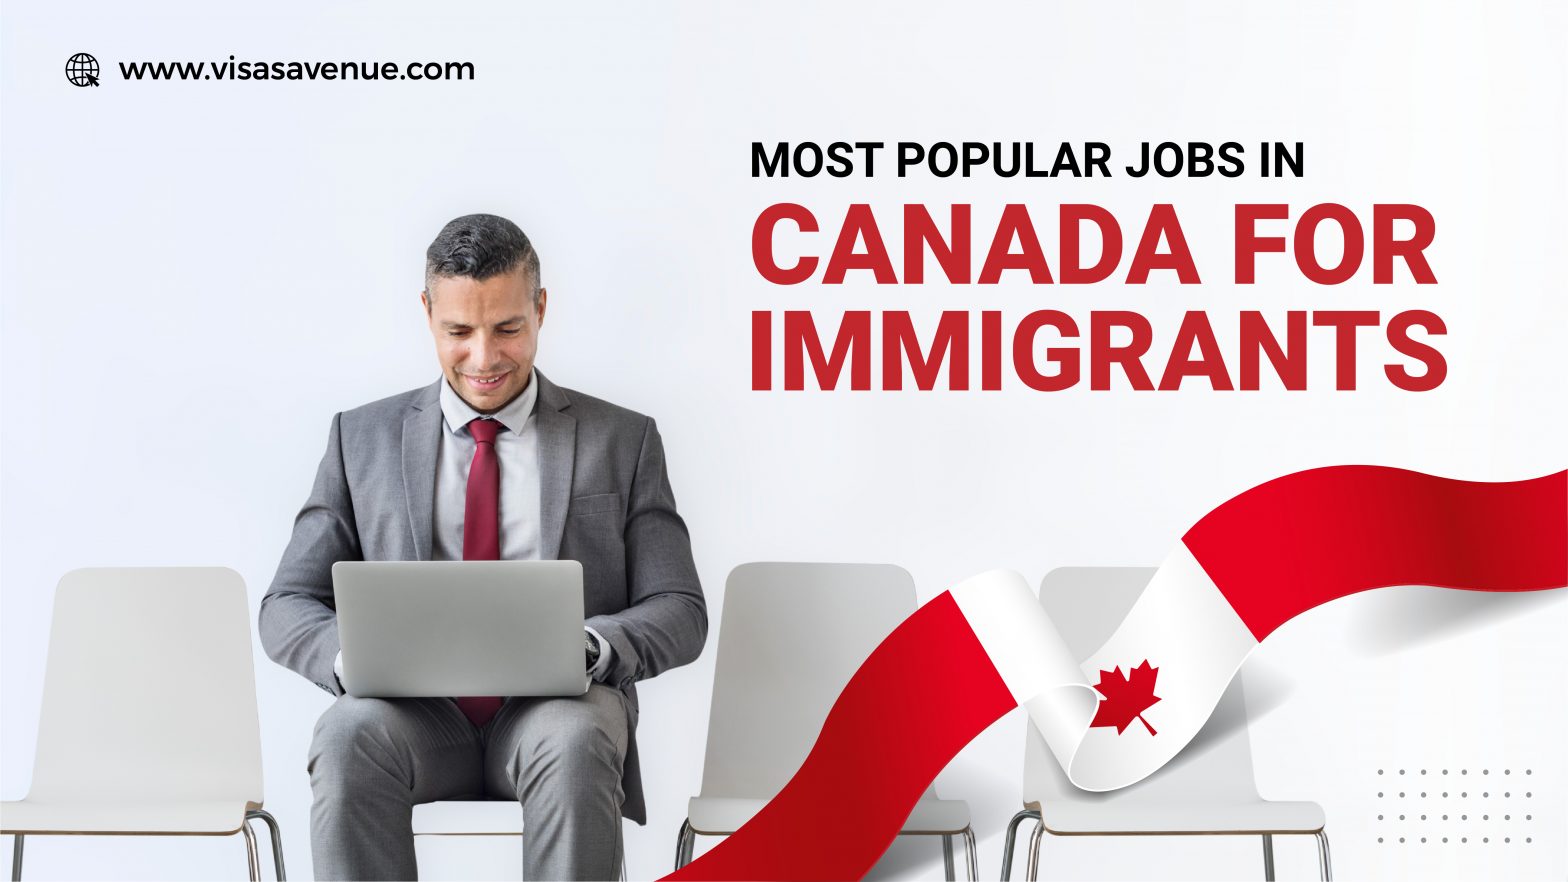 Most Popular Jobs in Canada for Immigrants